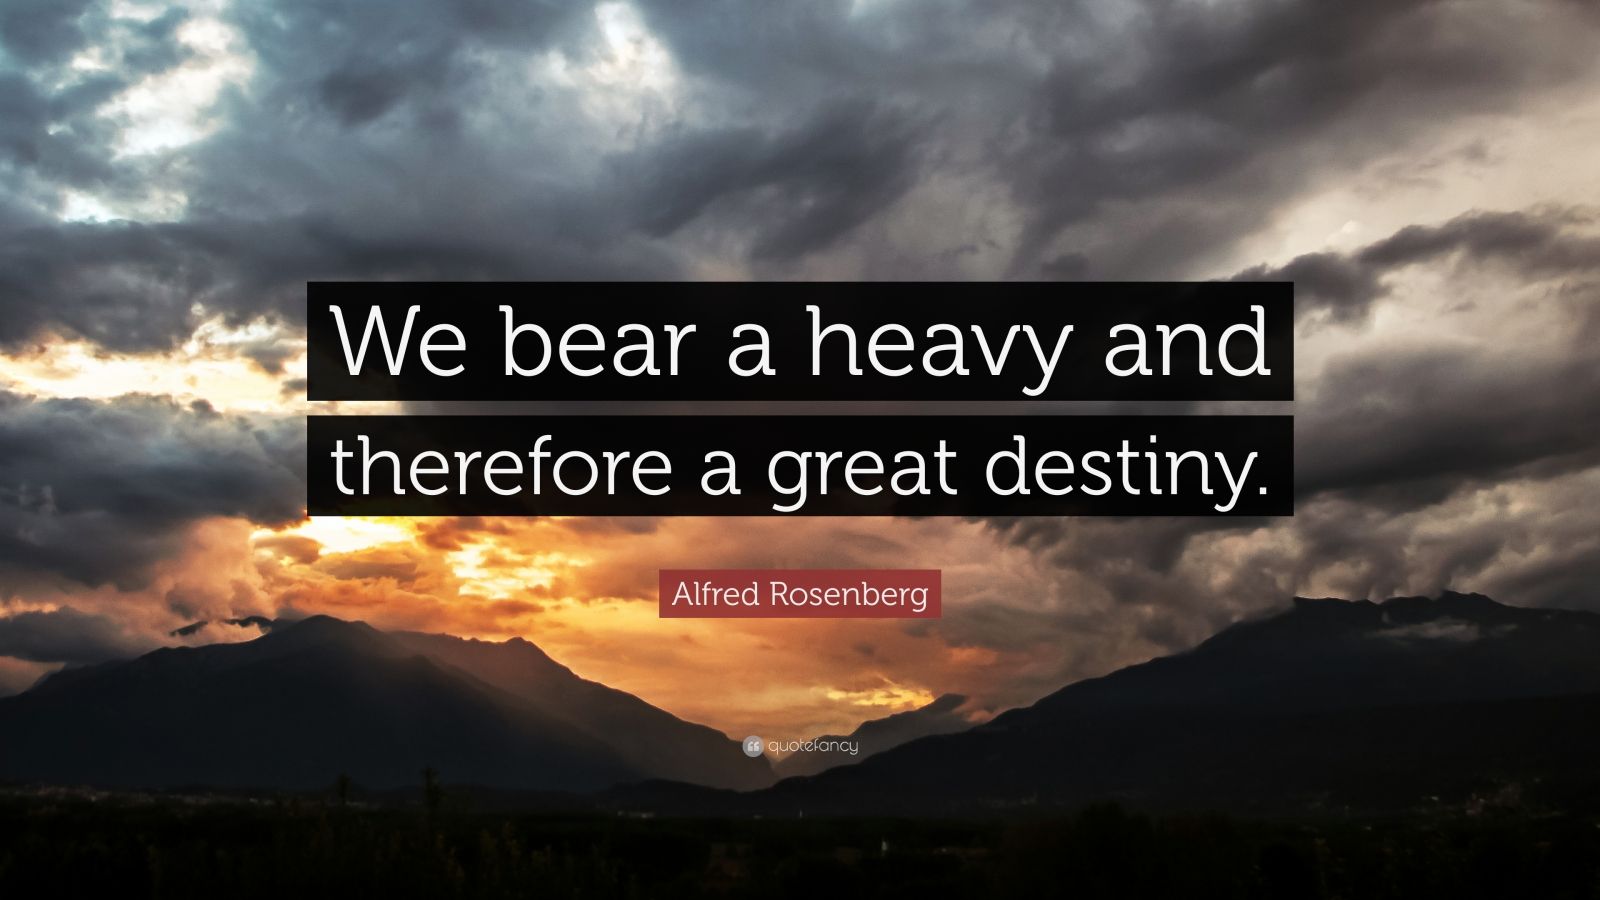 TOP 25 Alfred Rosenberg Quotes | 2021 Edition | QuoteFancy Images